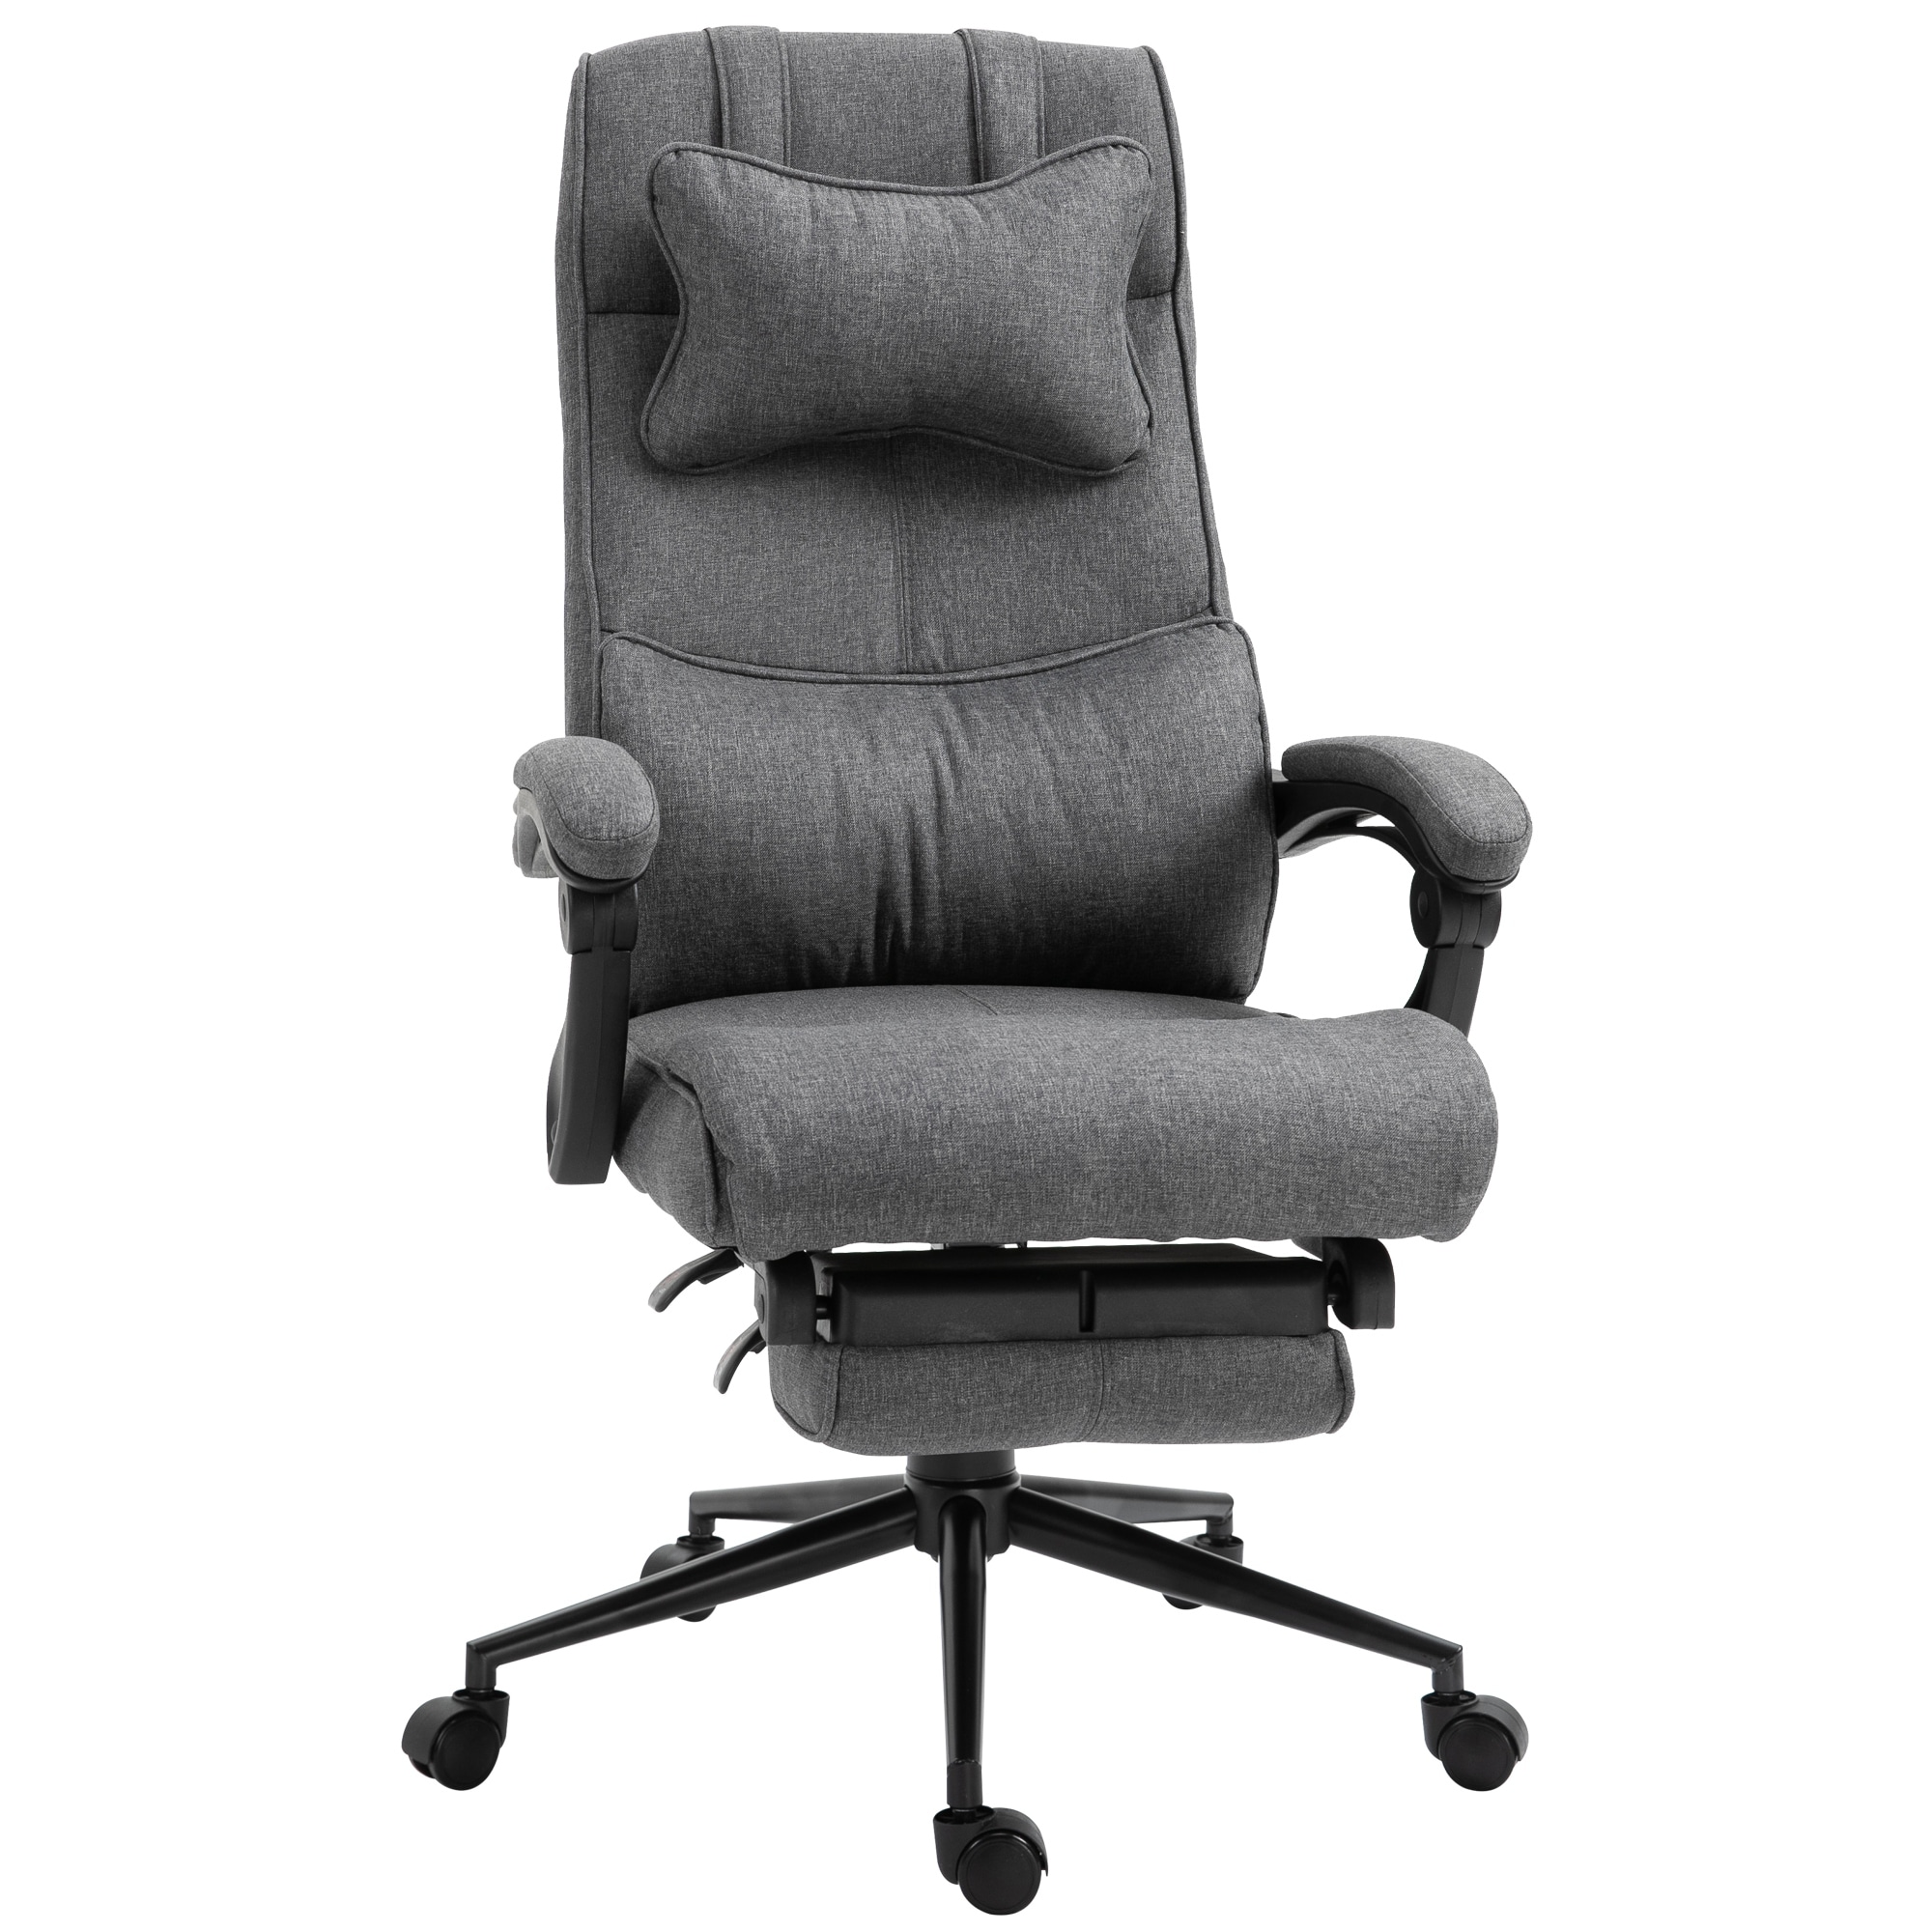 https://ak1.ostkcdn.com/images/products/is/images/direct/3be35e0342510e9442decb5bcfd72774a3e4609f/Vinsetto-Reclining-Home-Office-Chair-Executive-Adjustable-Rolling-Swivel-Chair-With-Retractable-Footrest.jpg